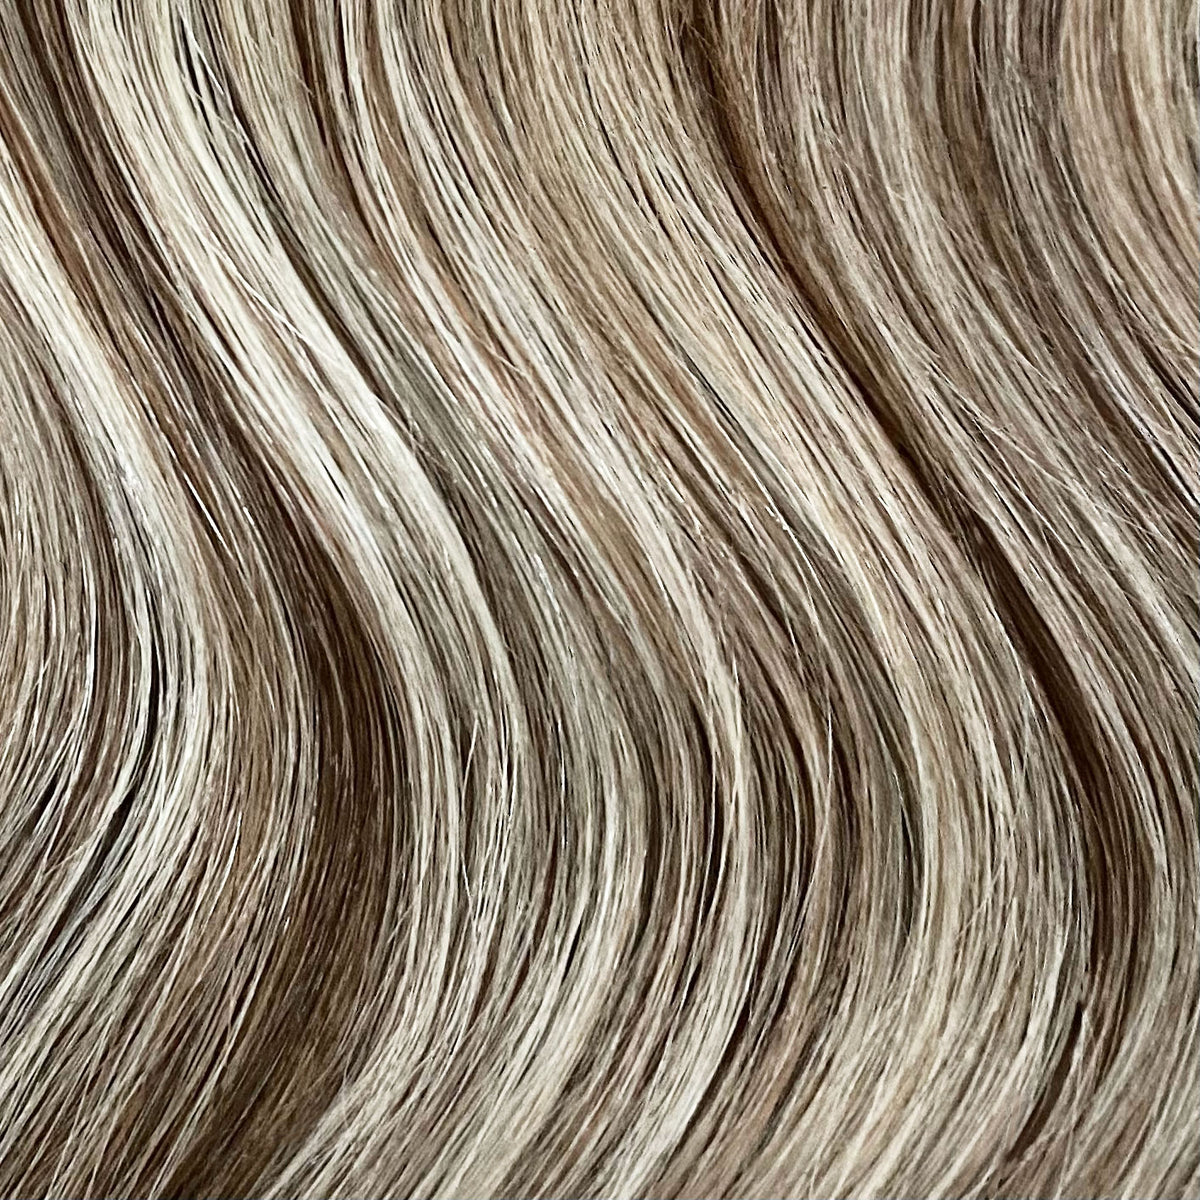 Amazing Quality Hair Extensions